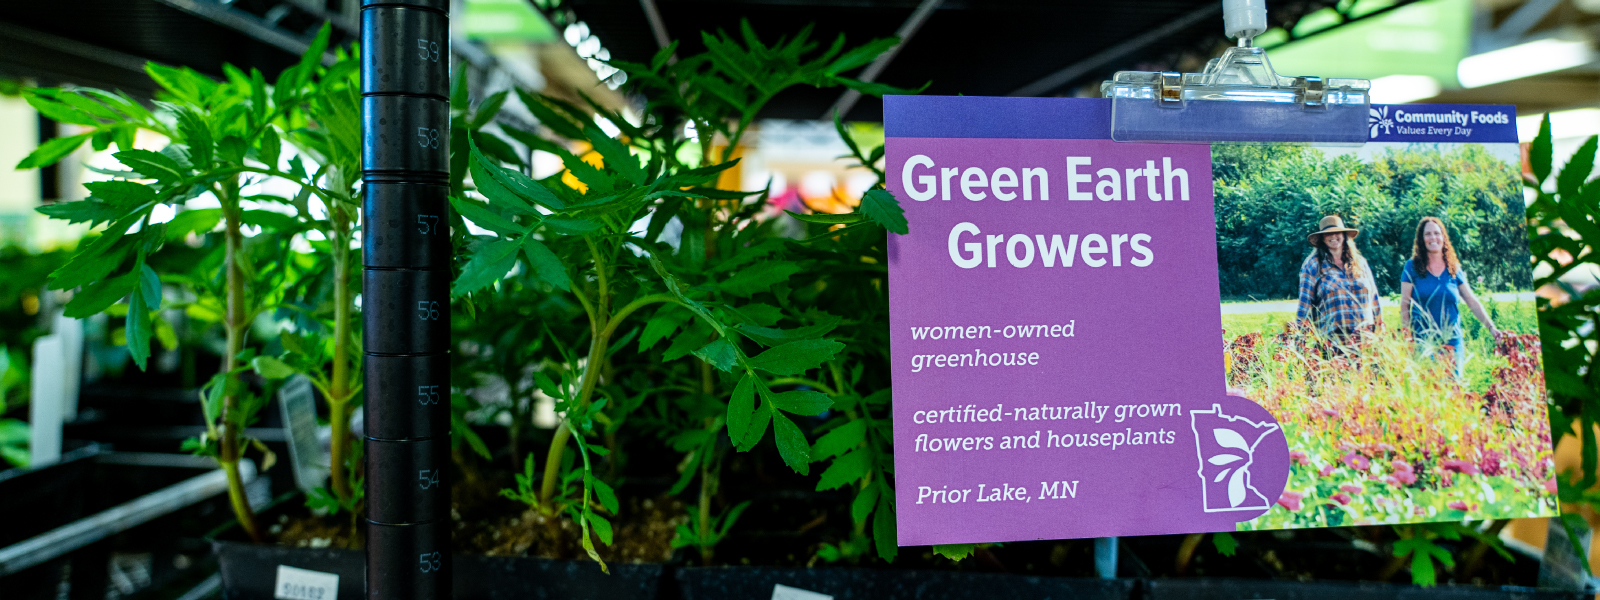 A view of starter plants with a sign that reads "Green Earth Growers"